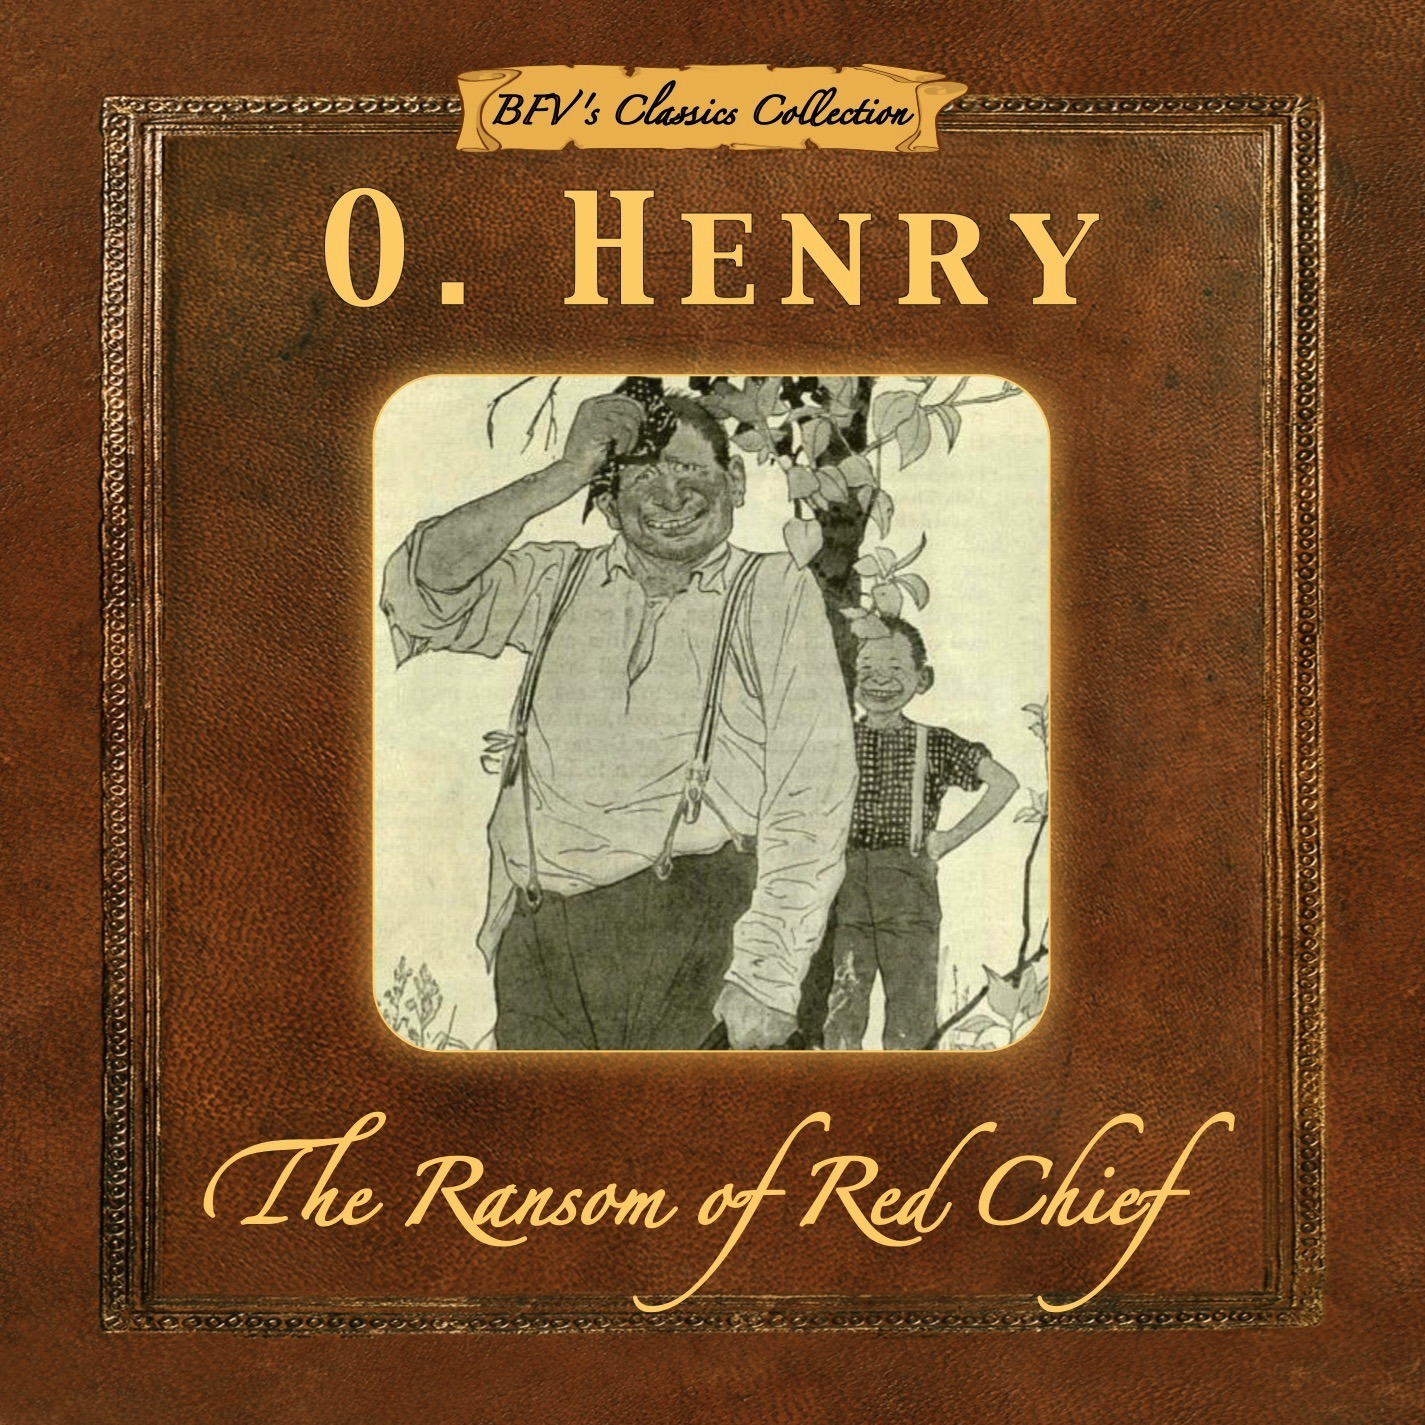 The Ransom of Red Chief by O. Henry